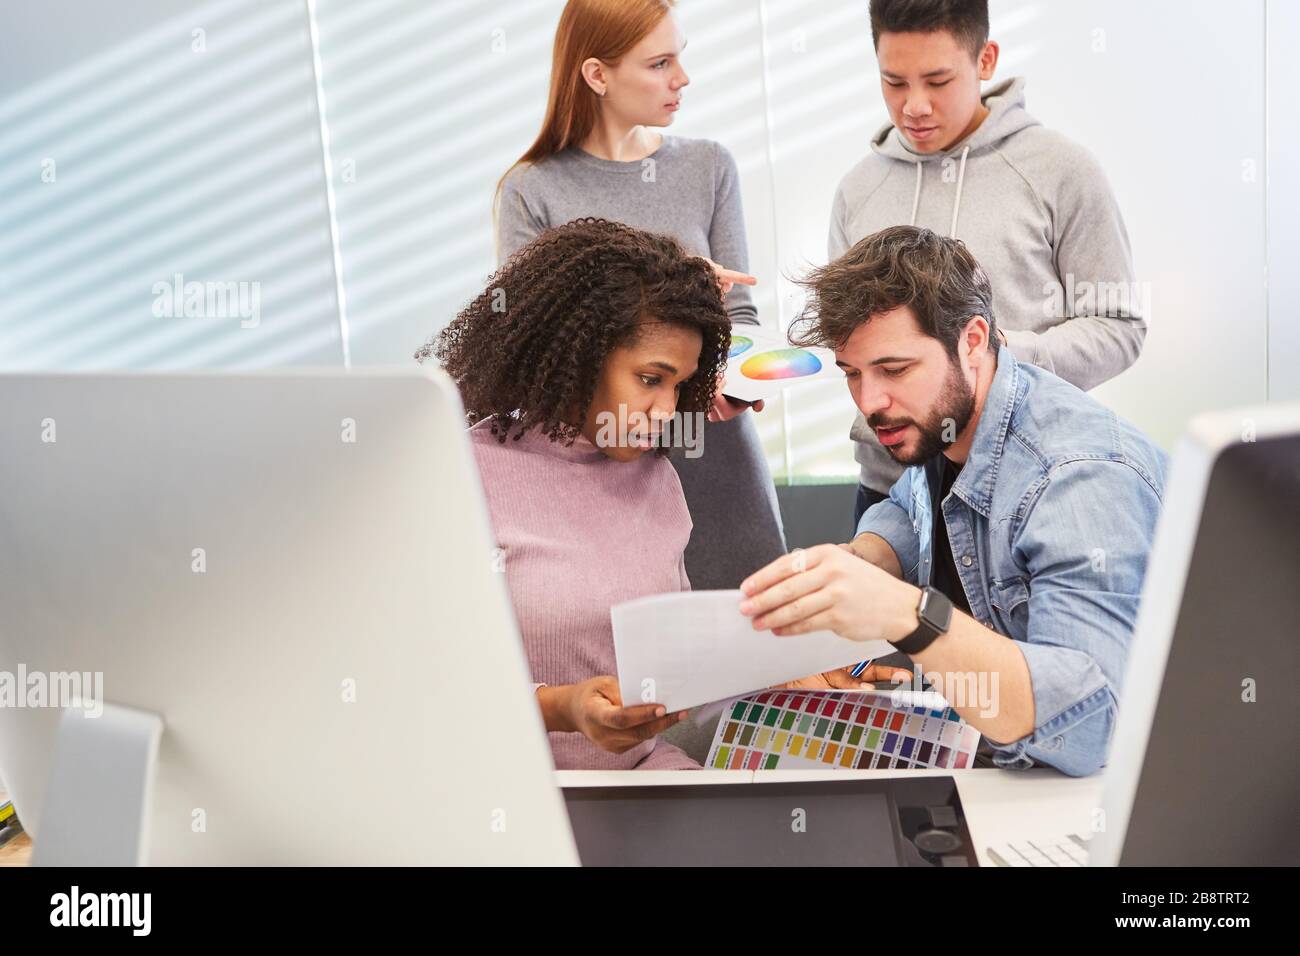 Web developer and graphic designer when choosing the color design for a customer project Stock Photo